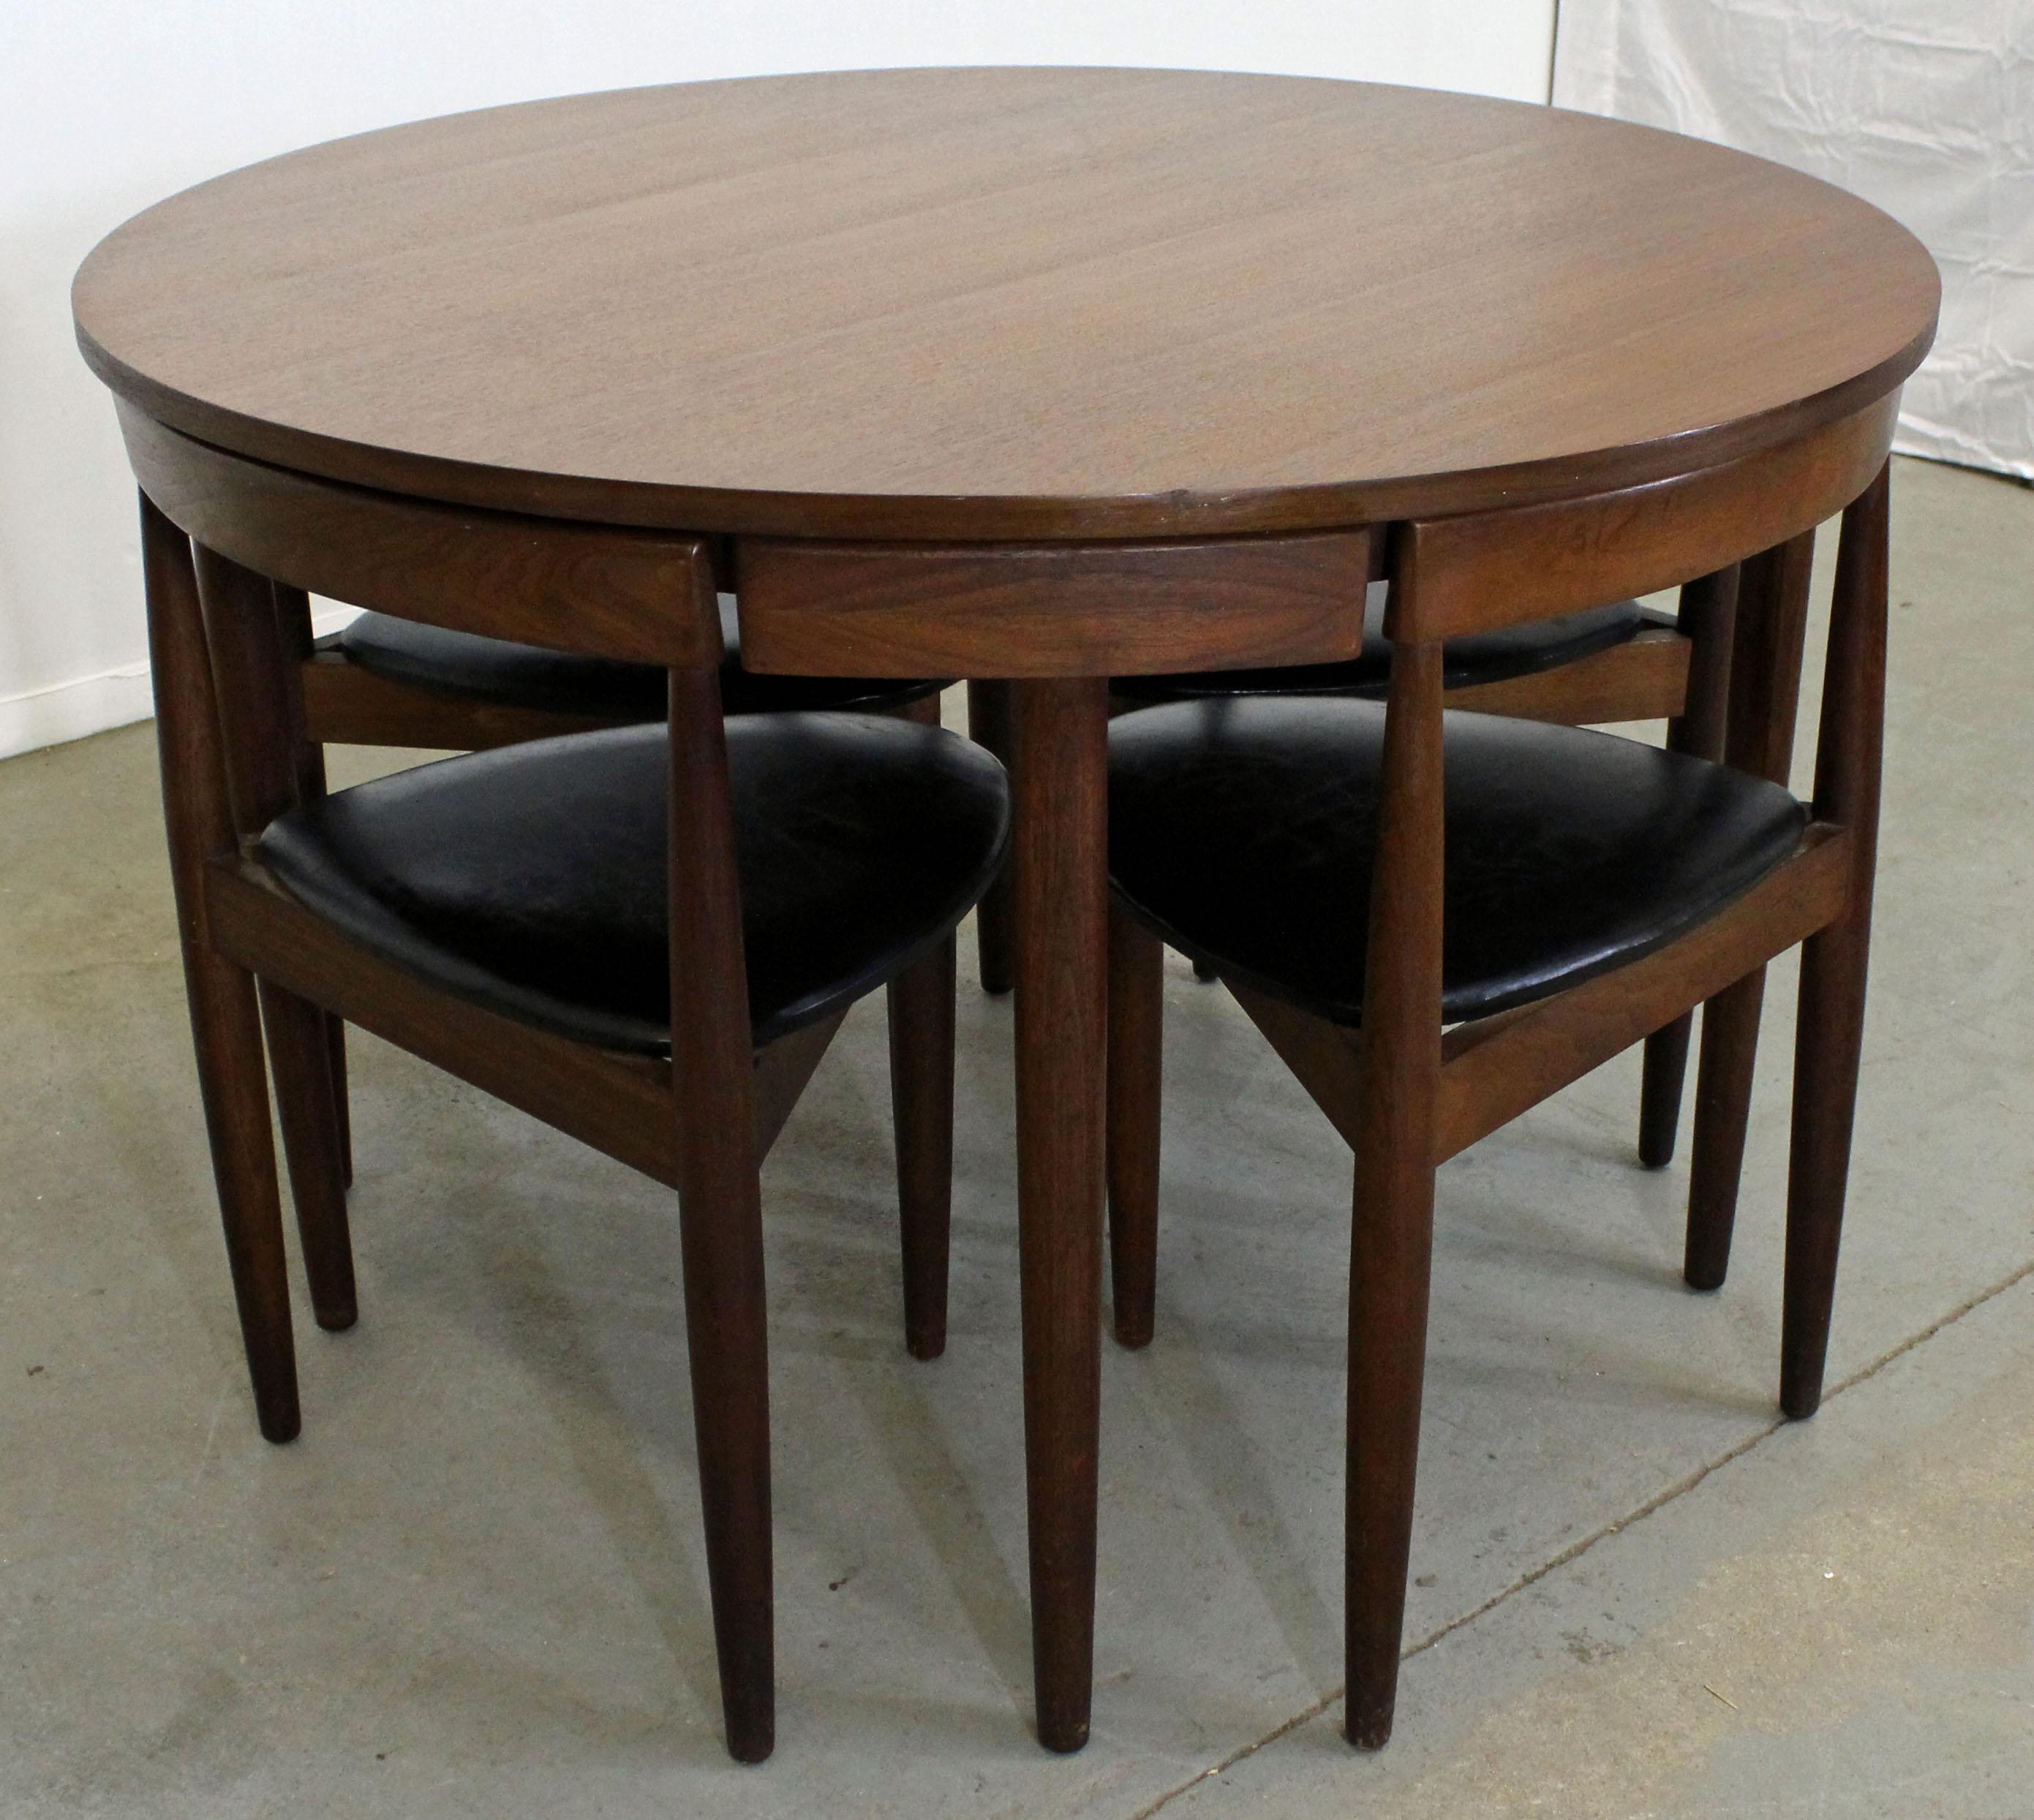 Offered is a Danish Modern teak dining table and set of 4 chairs, designed by Hans Olsen for Frem Rojle. Features a teak round table (no extension boards) and set of 4 chairs with three legs. The set is in excellent condition, showing minor surface